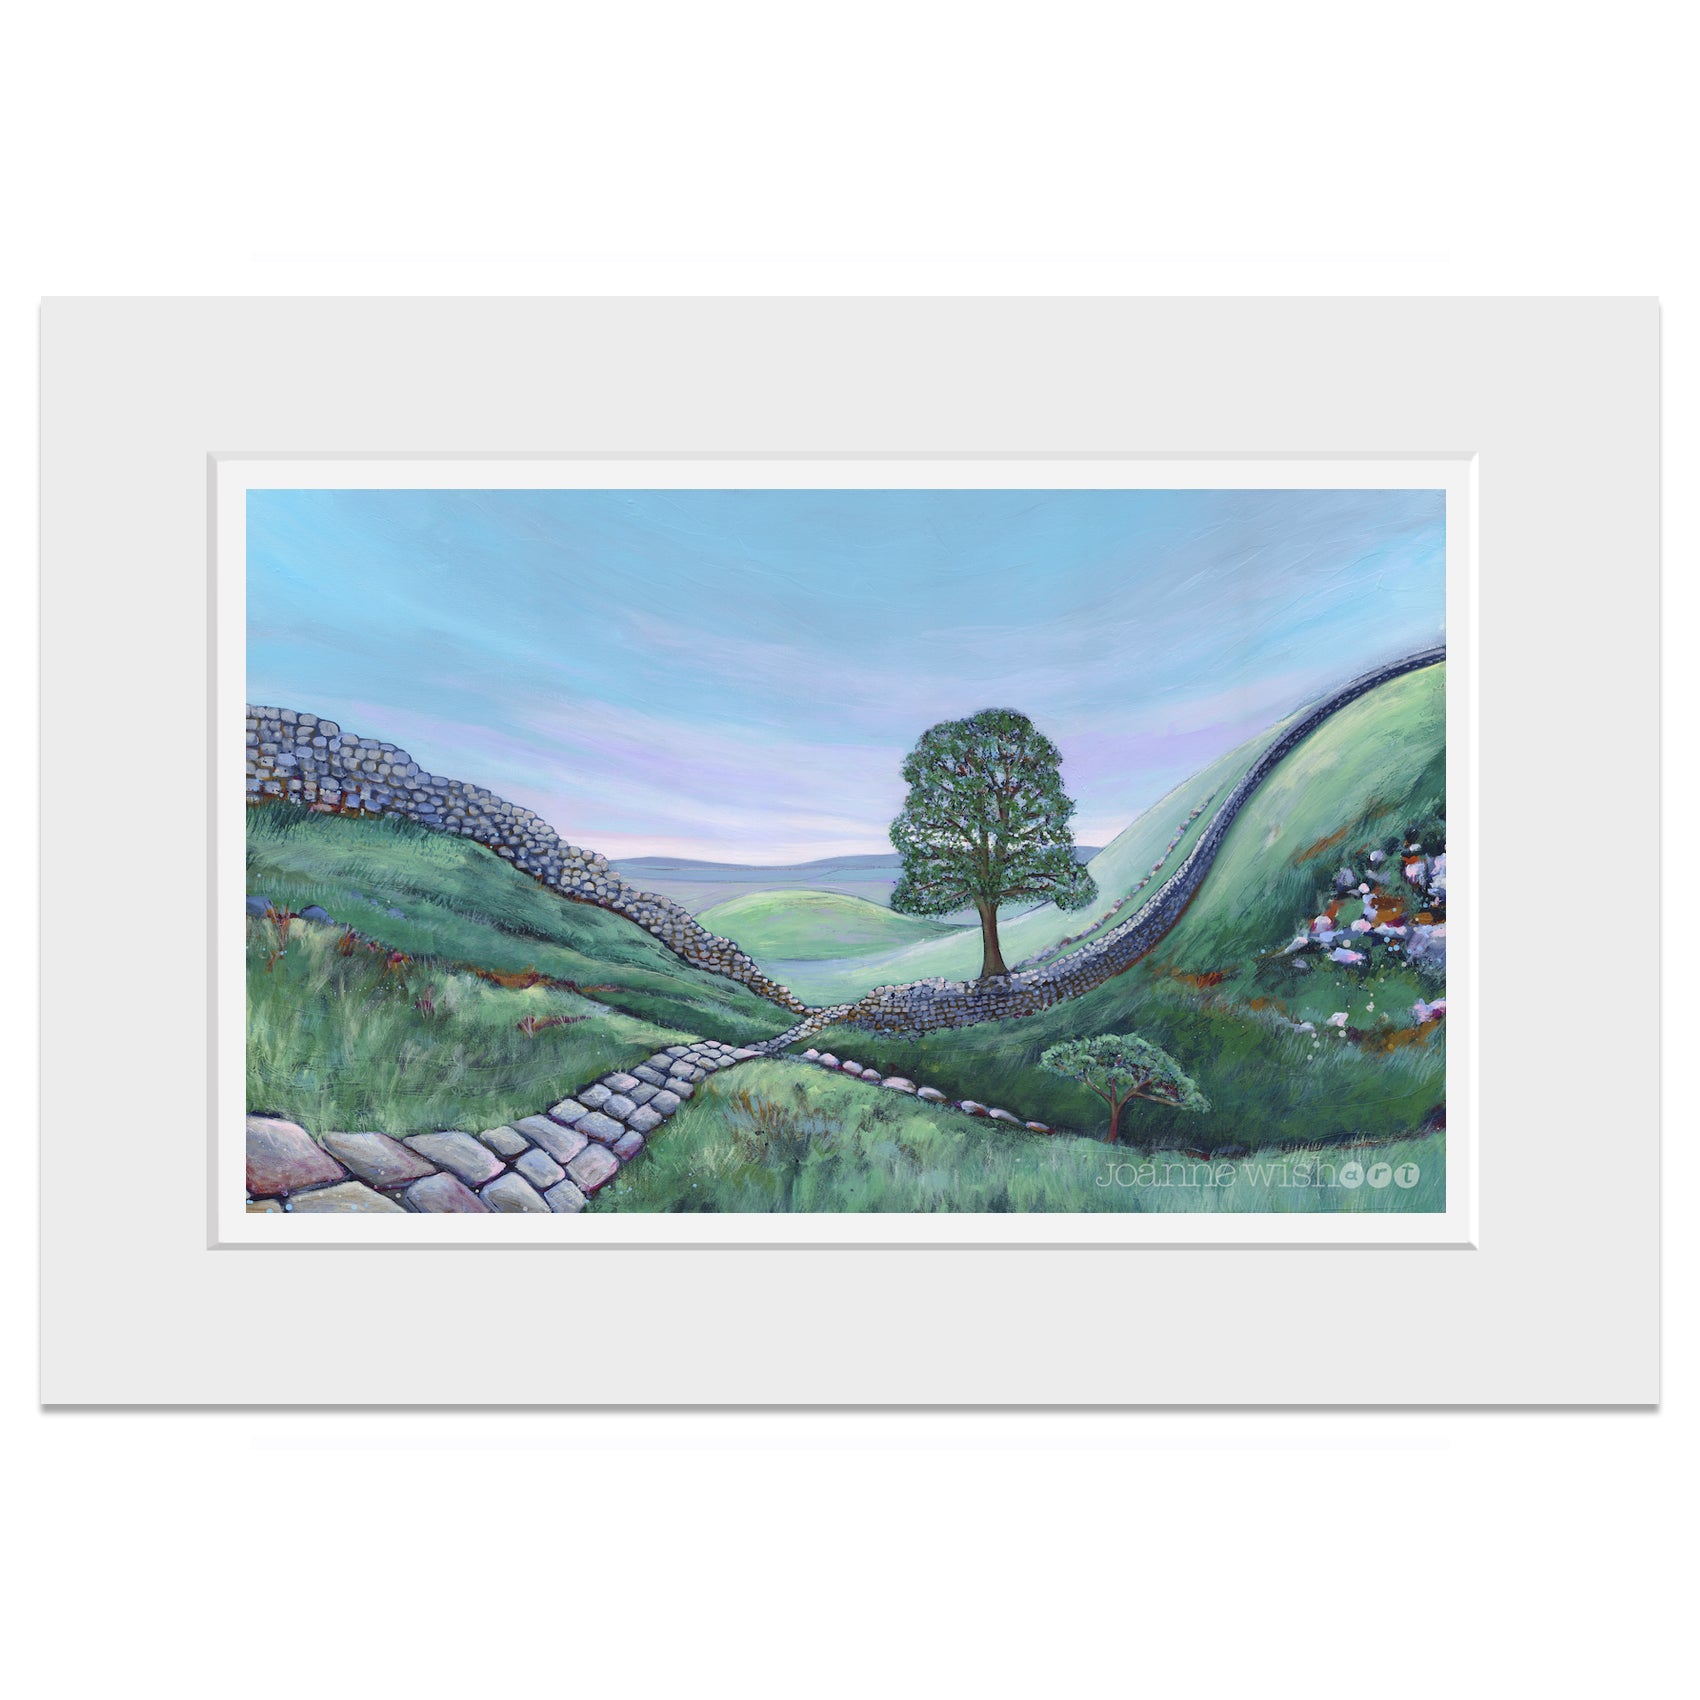 The Path to Sycamore Gap - Northumberland Landscape Print